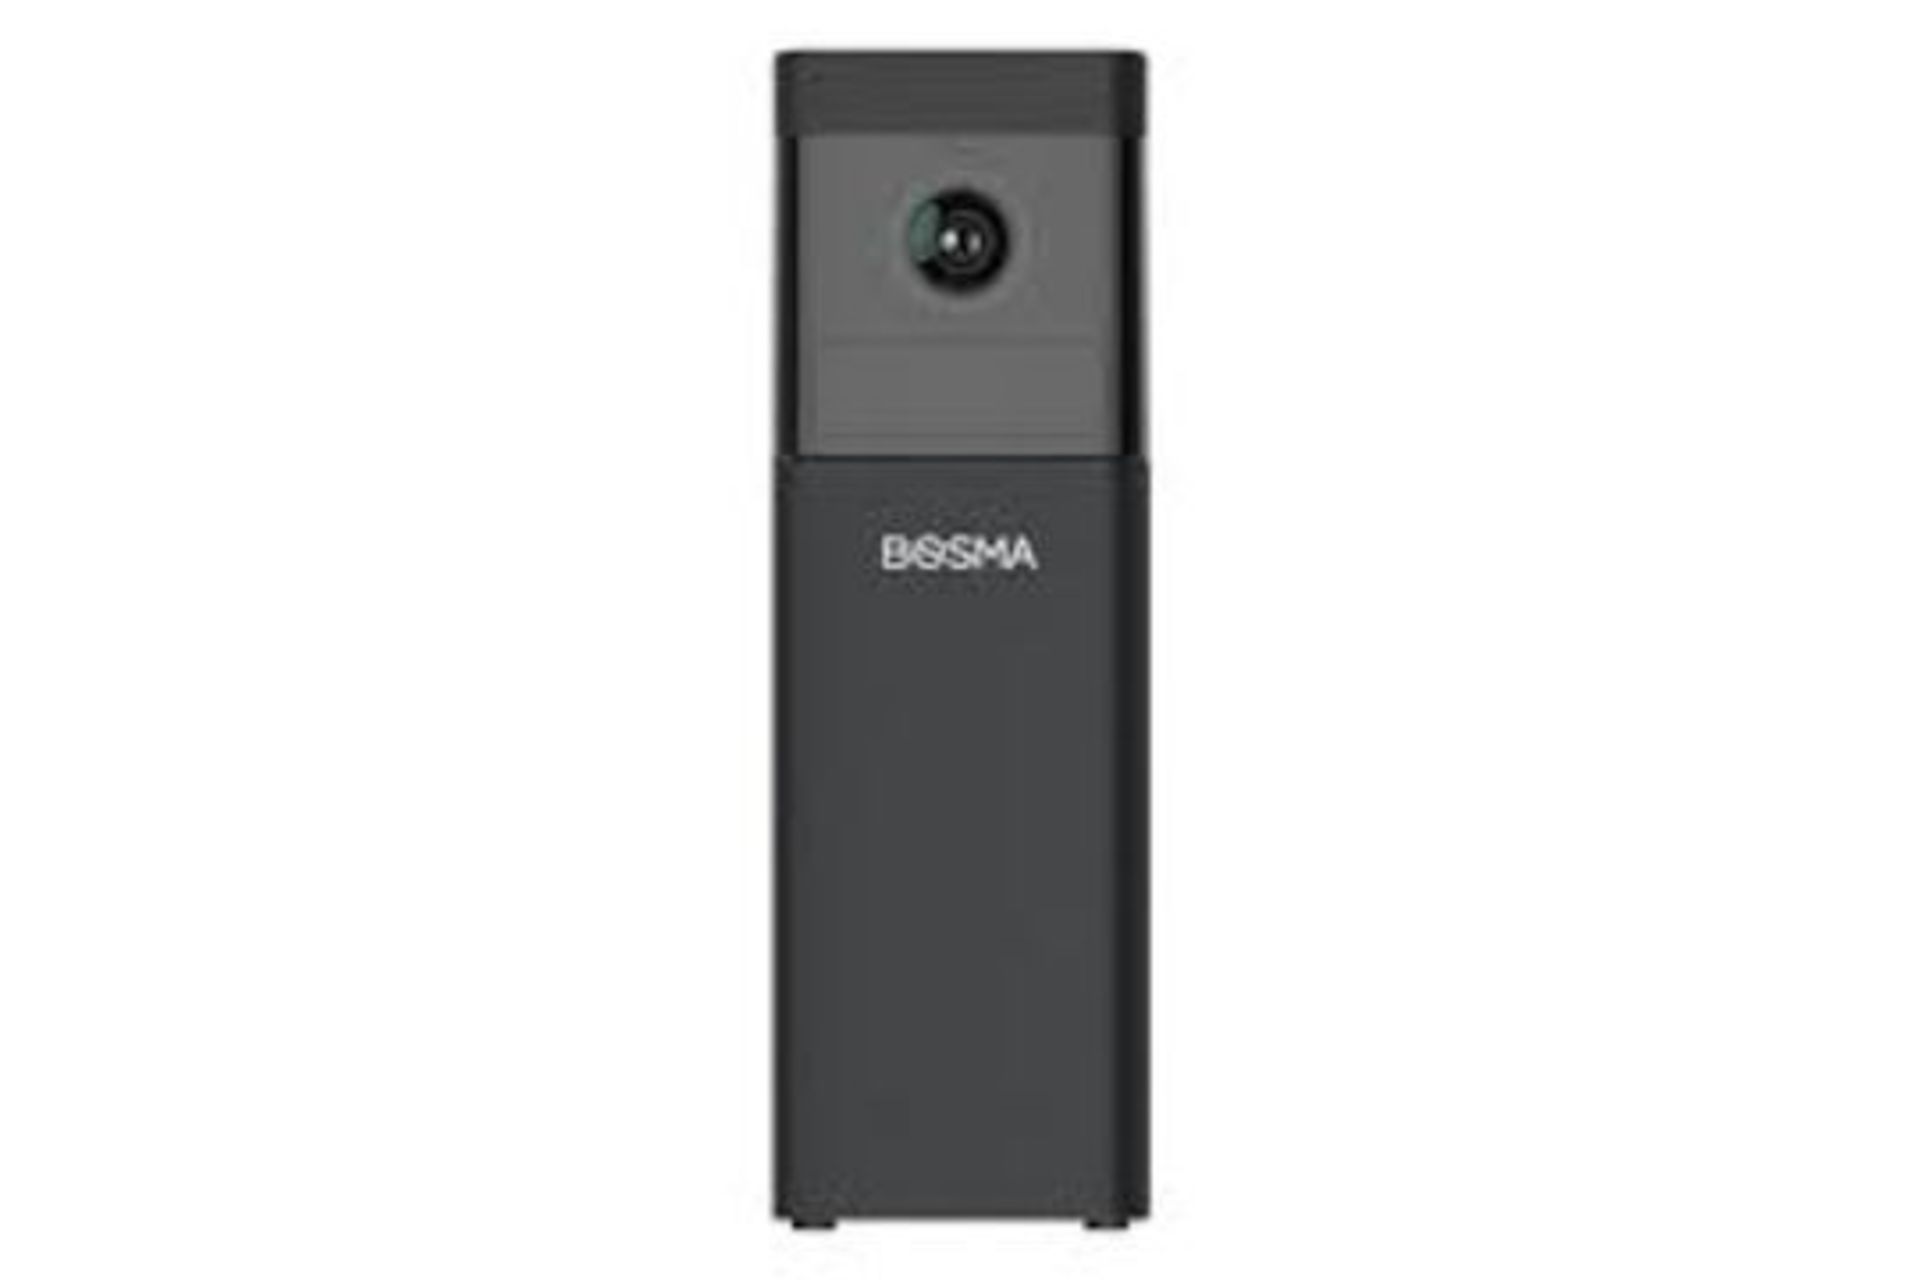 BRAND NEW BOSMA SECURITY CAMERA WITH COLOUR NIGHT VISION, PIR MOTION DETCECTION, SMART HUB BUILT